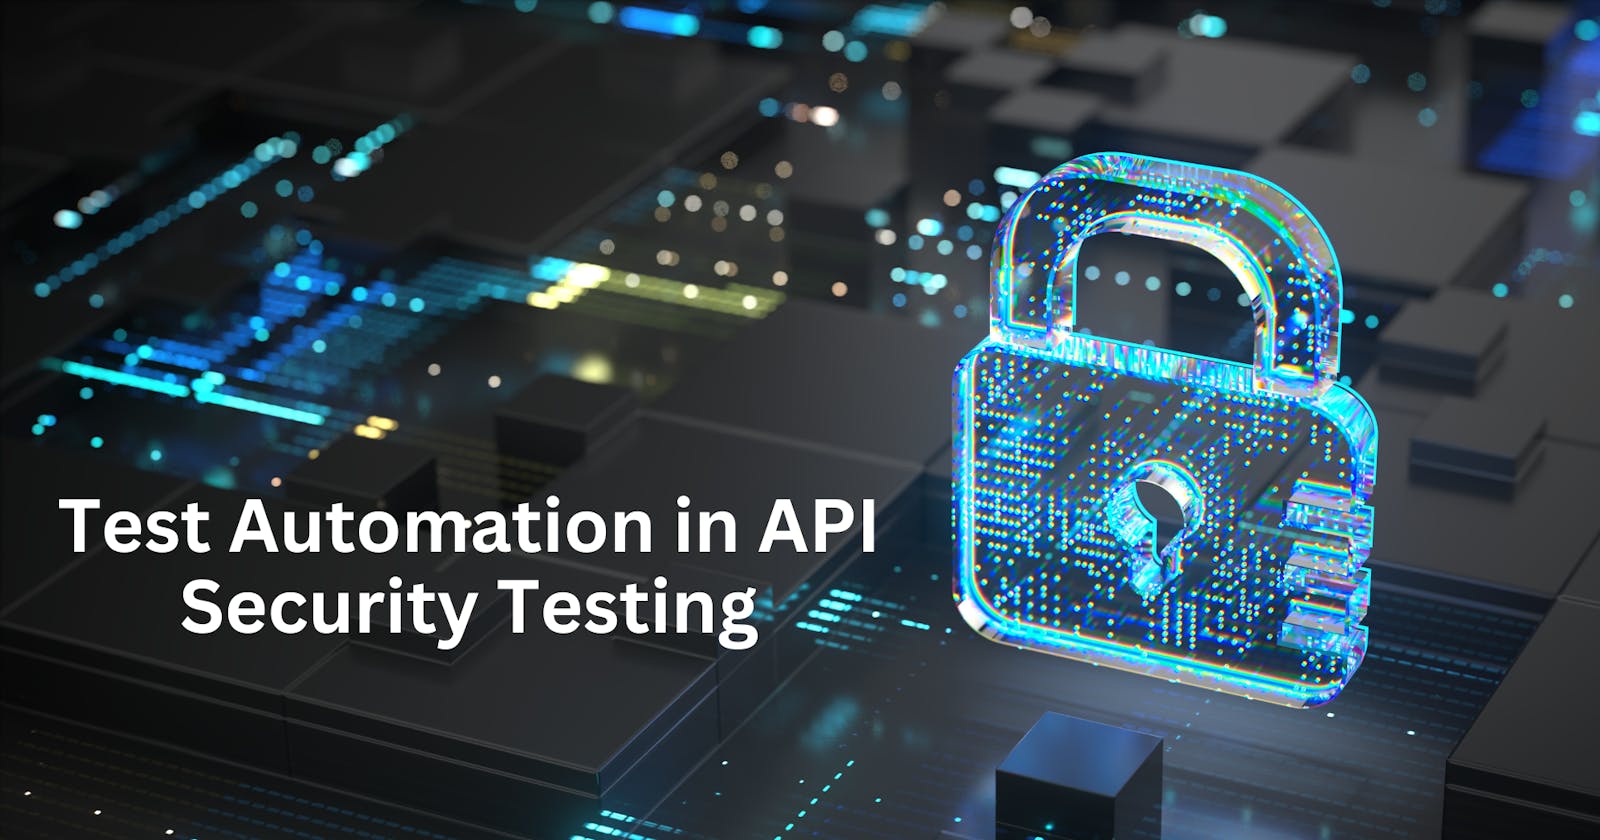 Test Automation in API Security Testing